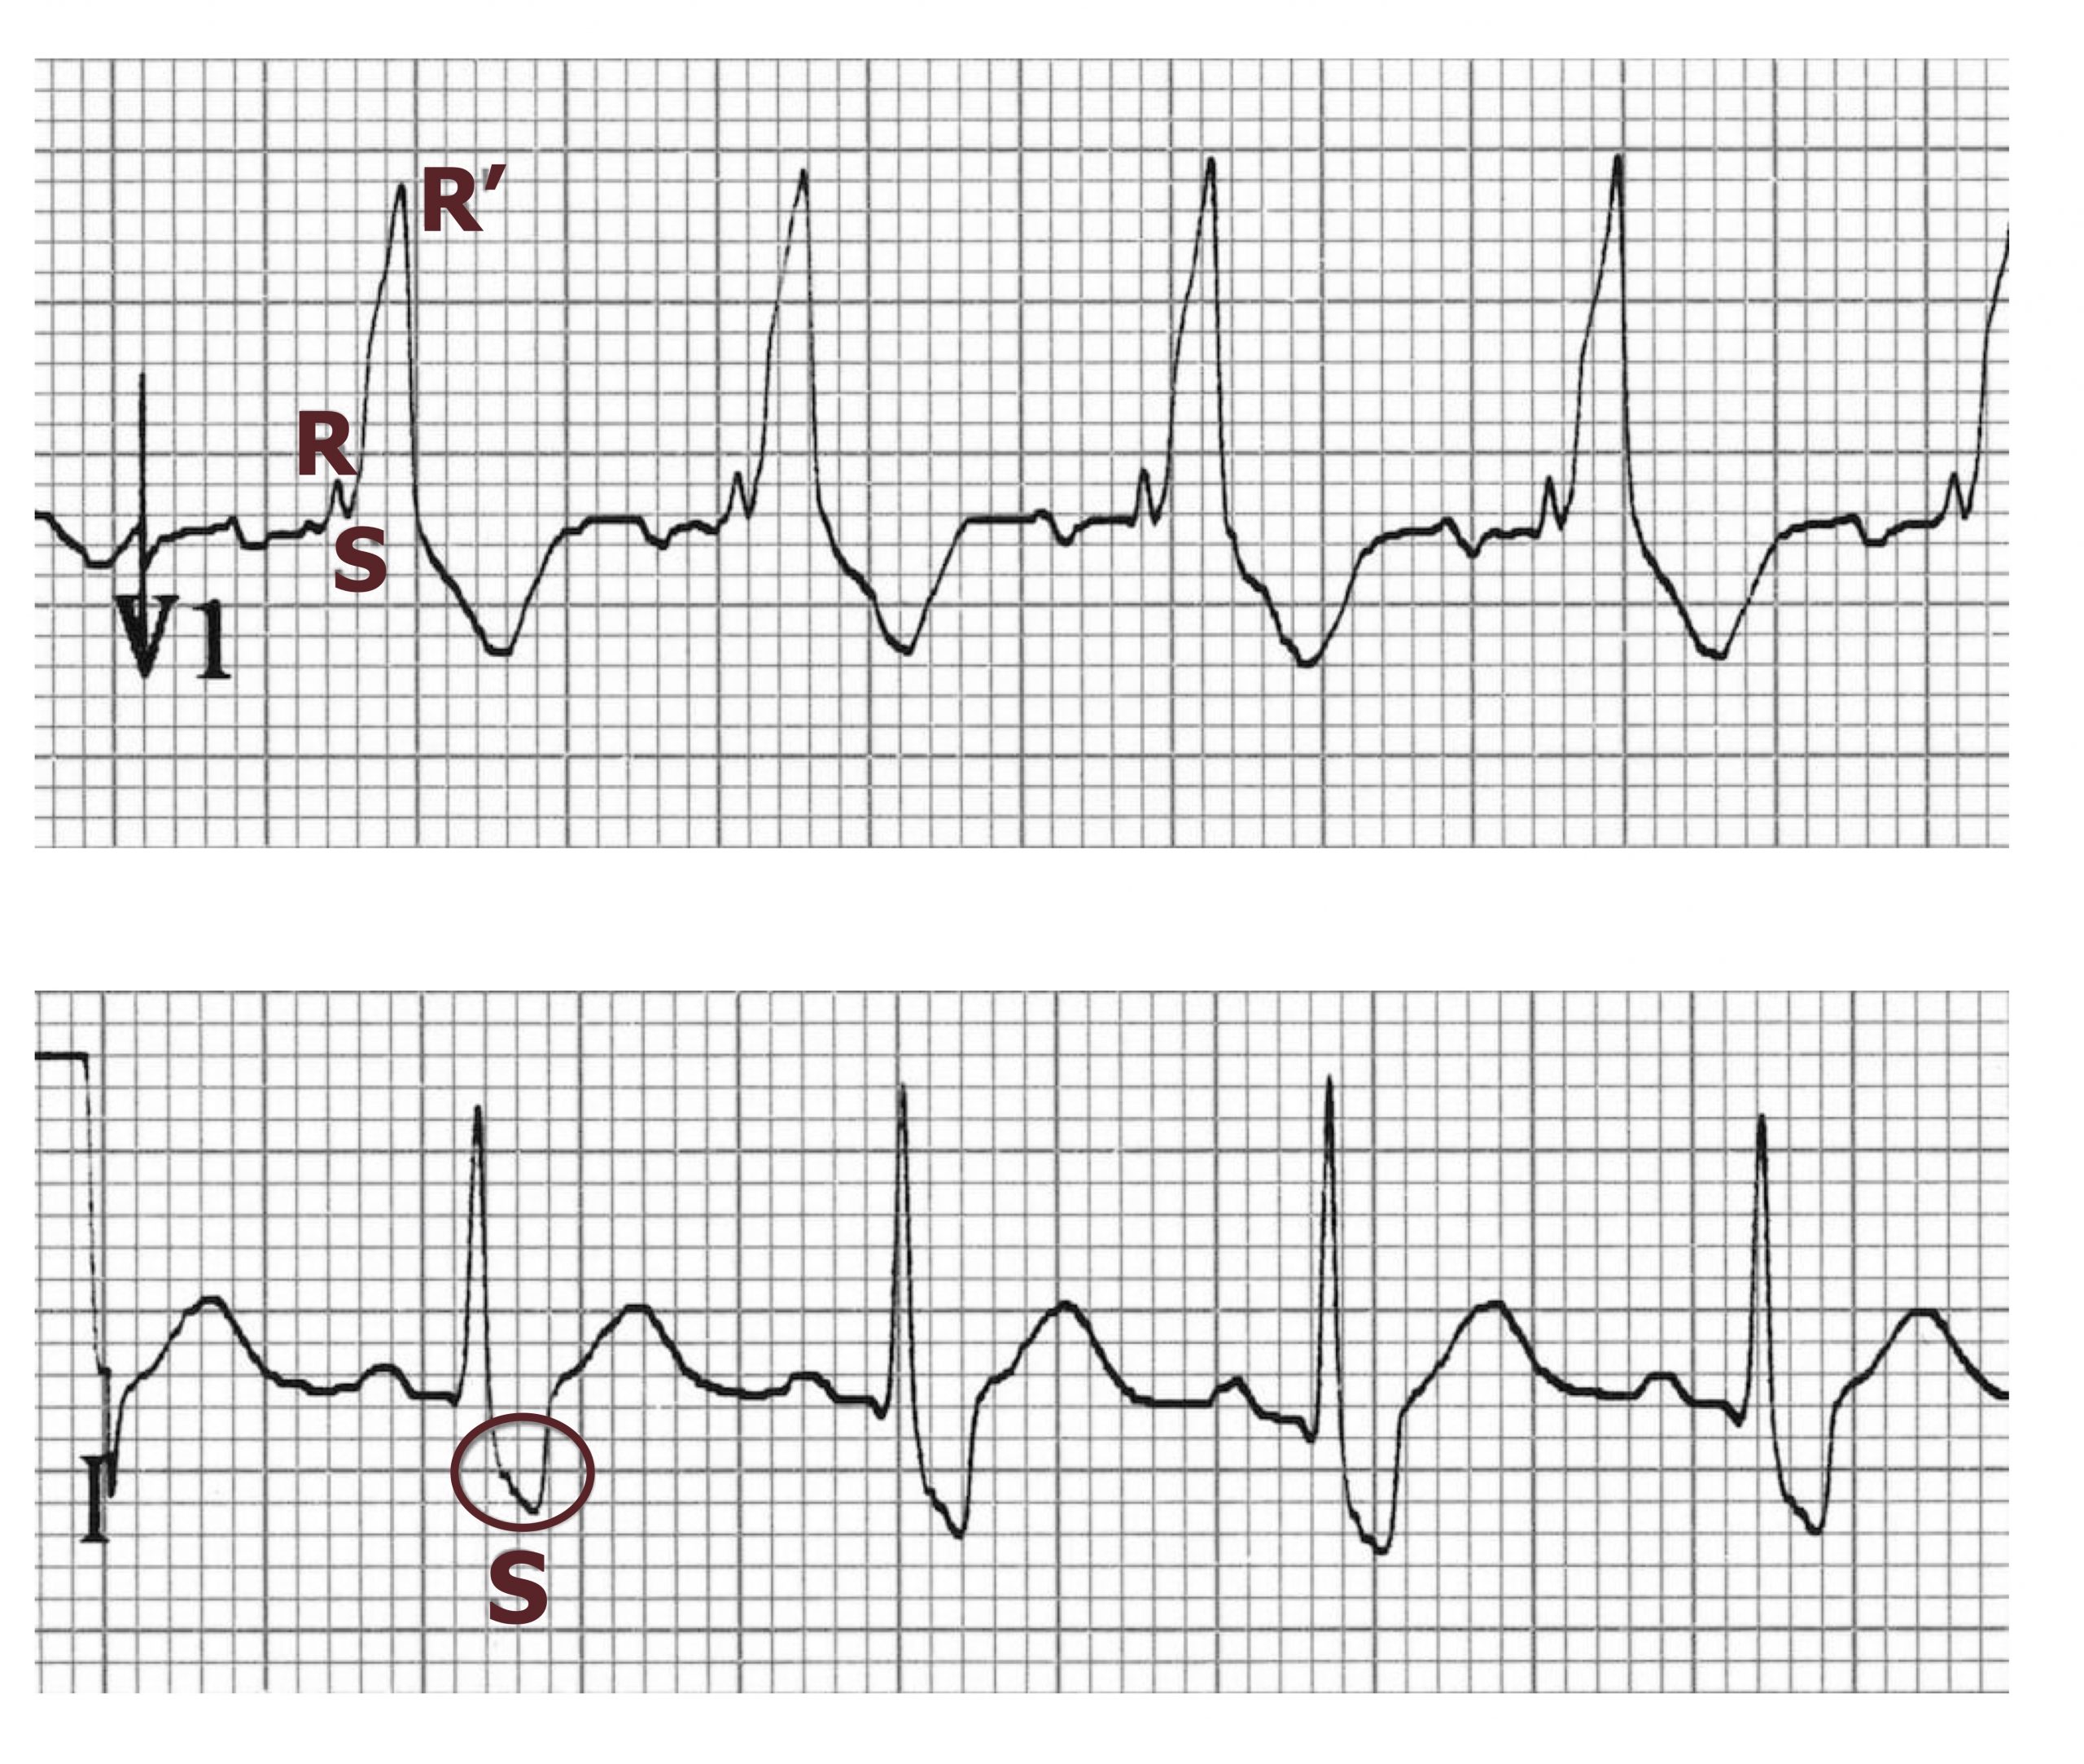 The figure is comprised of two panels, one showing the ECG of lead V1. The other shows the ECG from lead I. The V1 ECG includes a broader wave that has a notched appearance with a peak, followed by another peak. The first peak has been labelled R and the second has been labelled R prime. The lead I ECG shows a slurred S-wave which has a shallower downward slope than a normal S-wave and so the S-wave has a longer duration.